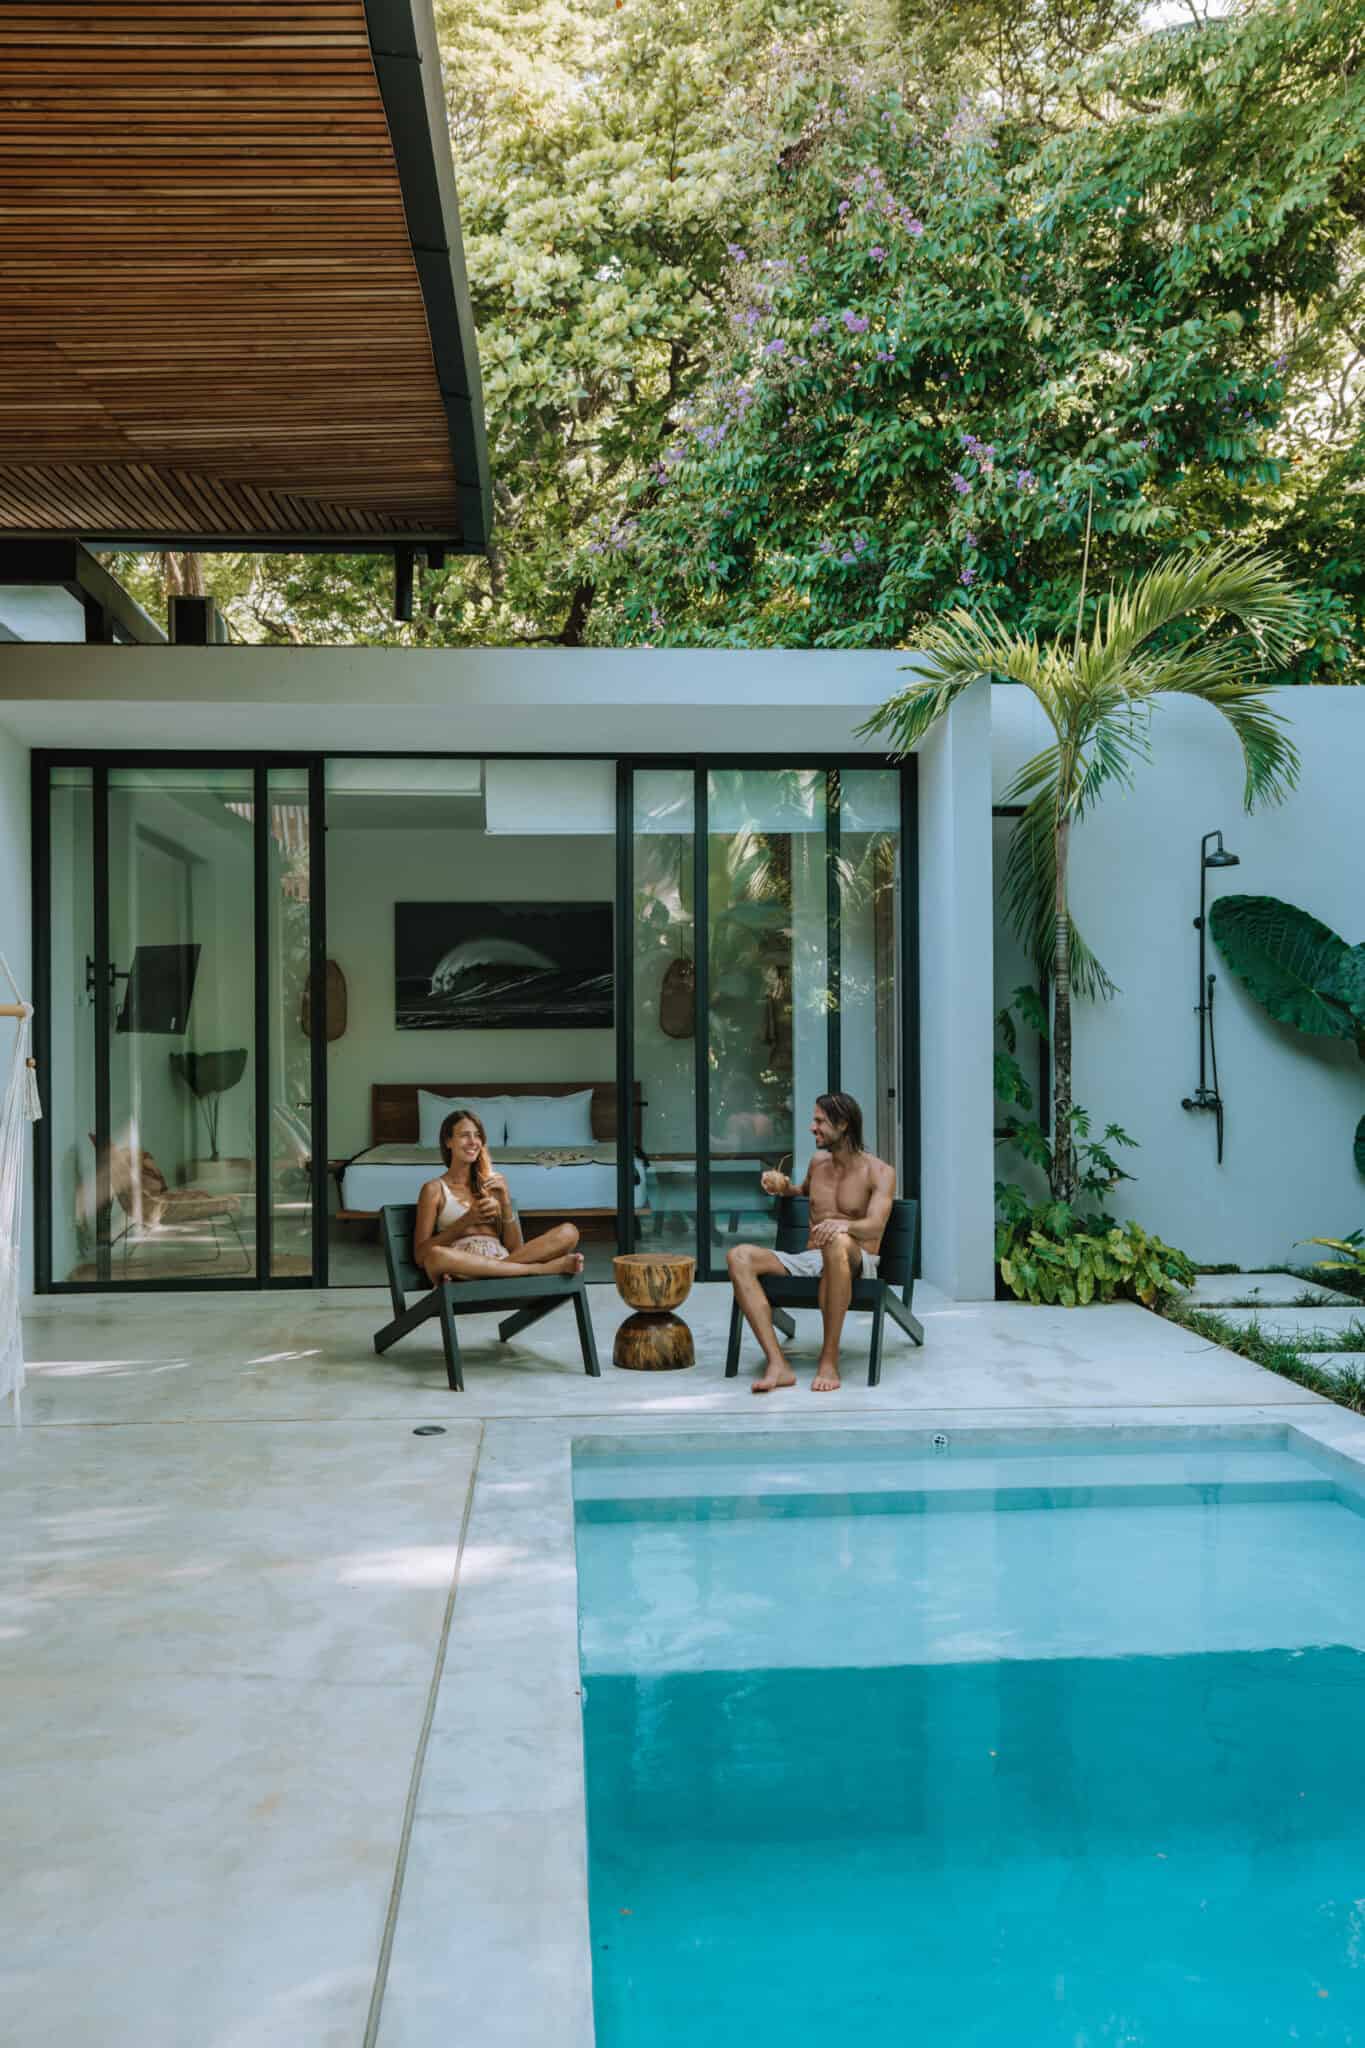 Two people work with us by a pool in a modern house.